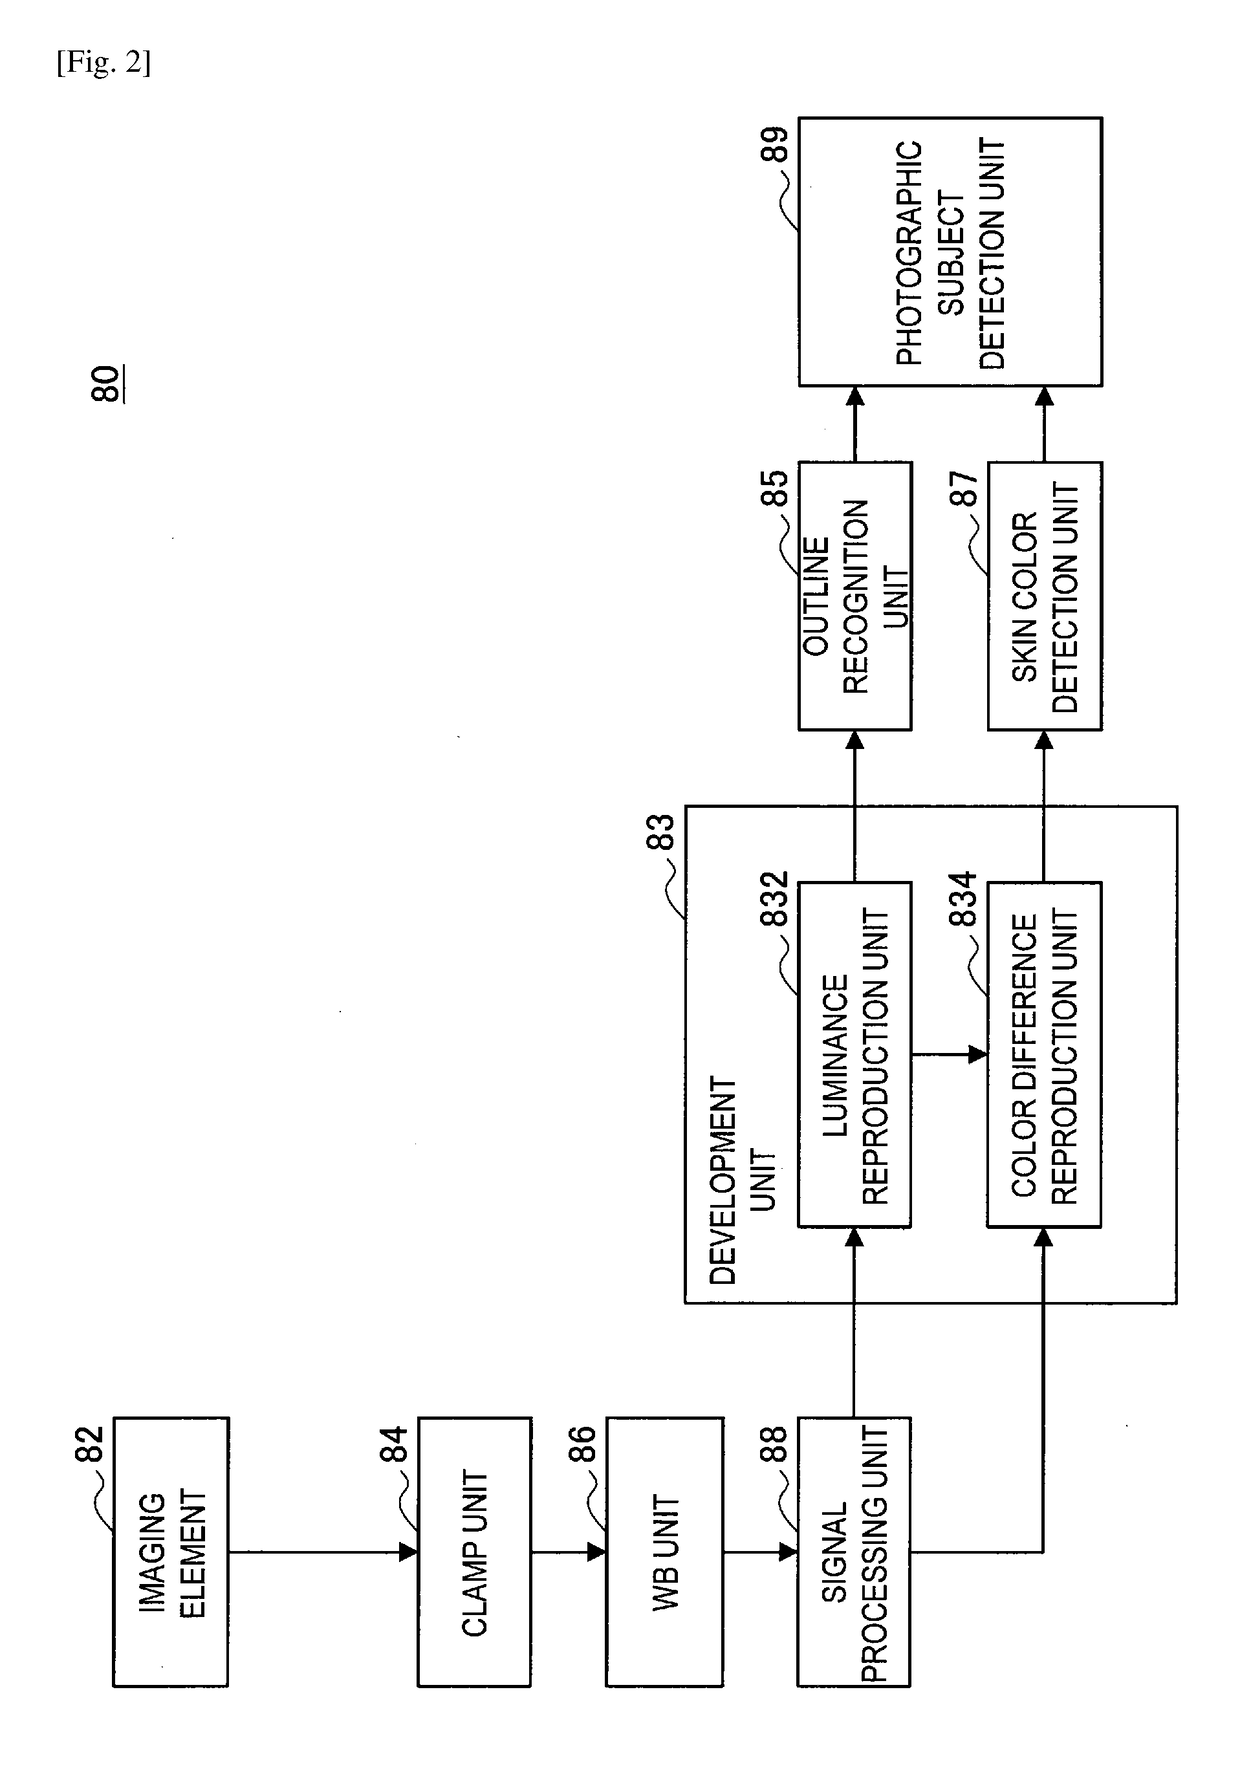 Image processing apparatus, image processing method, and imaging system